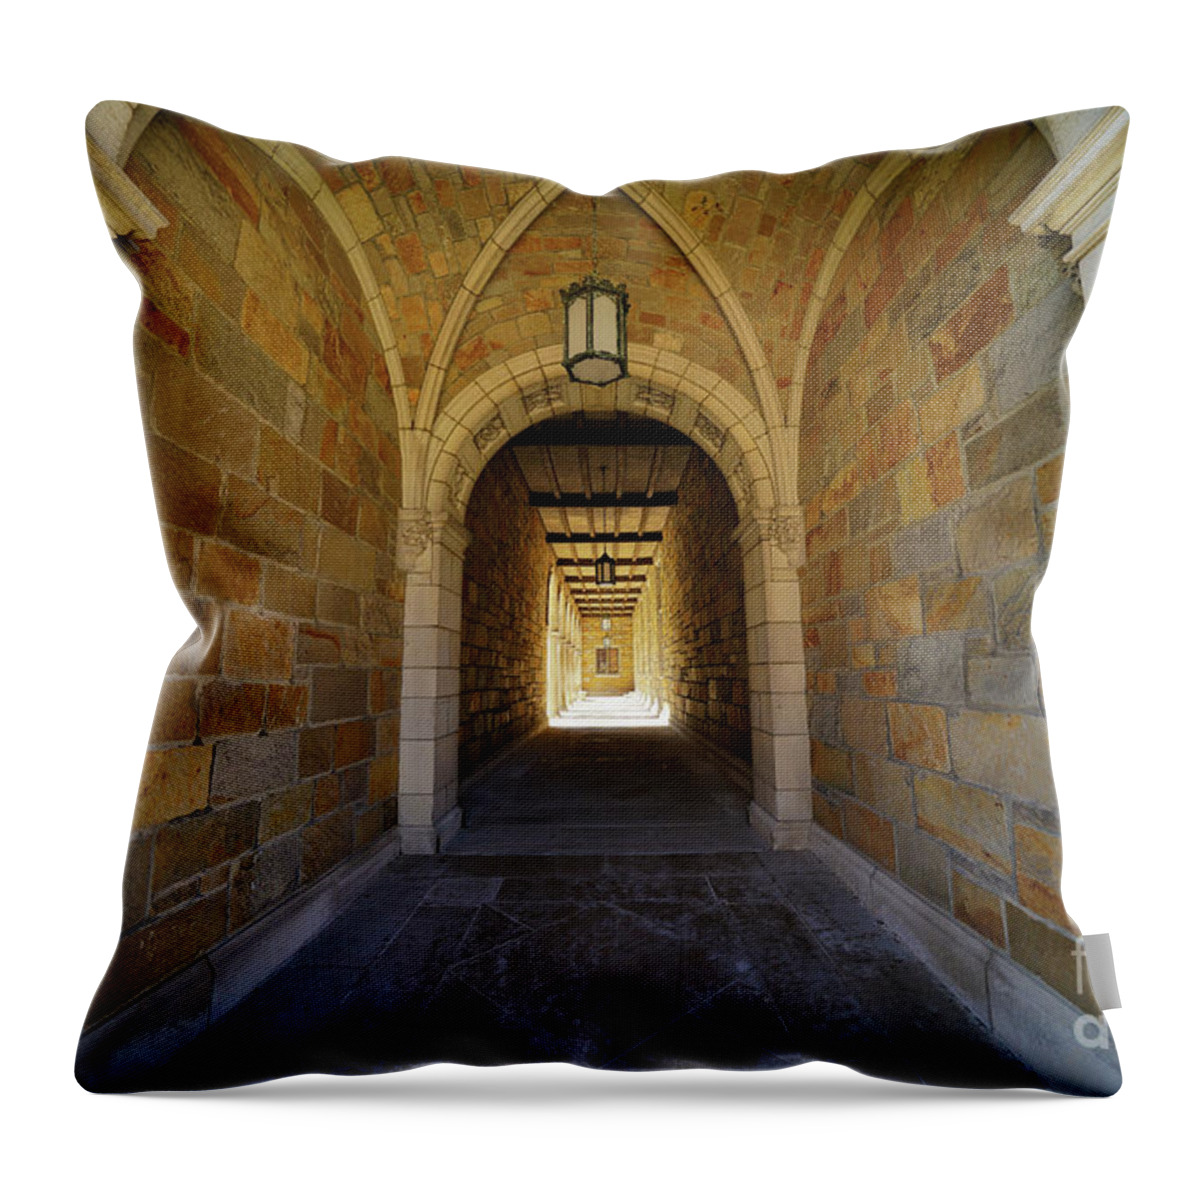 U Of M Law Quad Hallway 1 Throw Pillow featuring the photograph U of M Law Quad Hallway 1 by Rachel Cohen